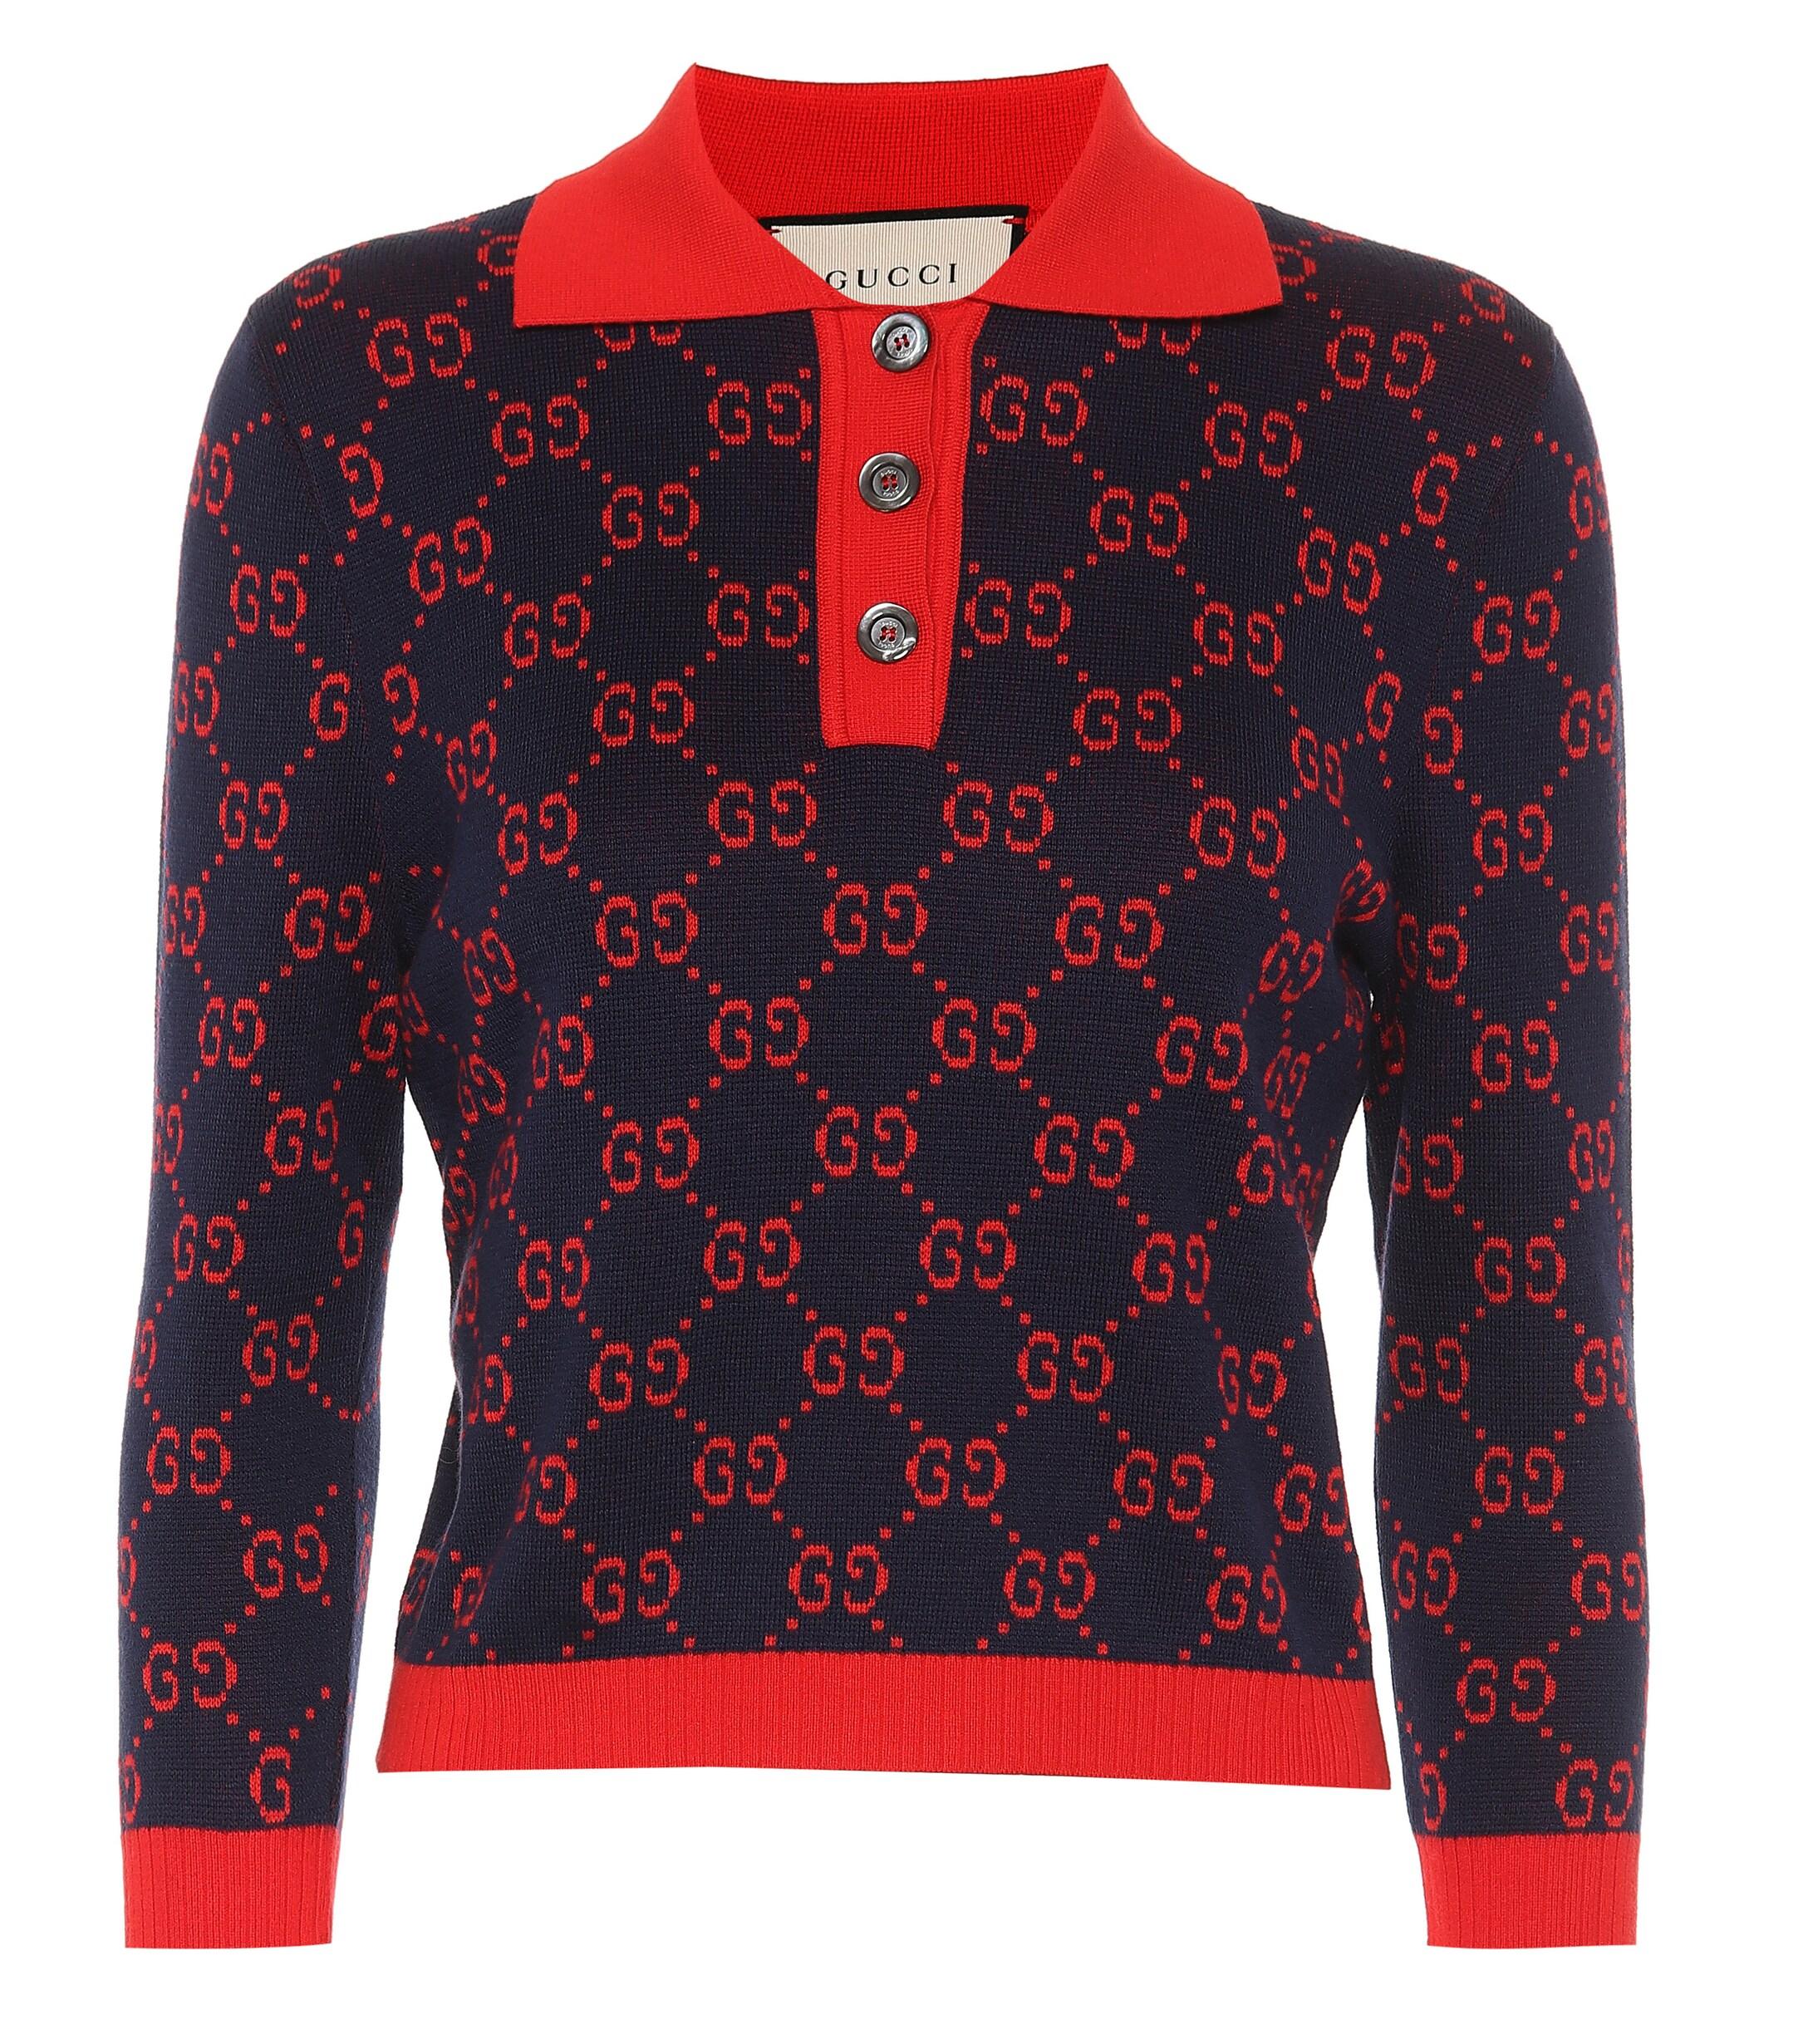 Gucci GG Intarsia Cotton Sweater in Blue/Red (Blue) - Save 1% - Lyst